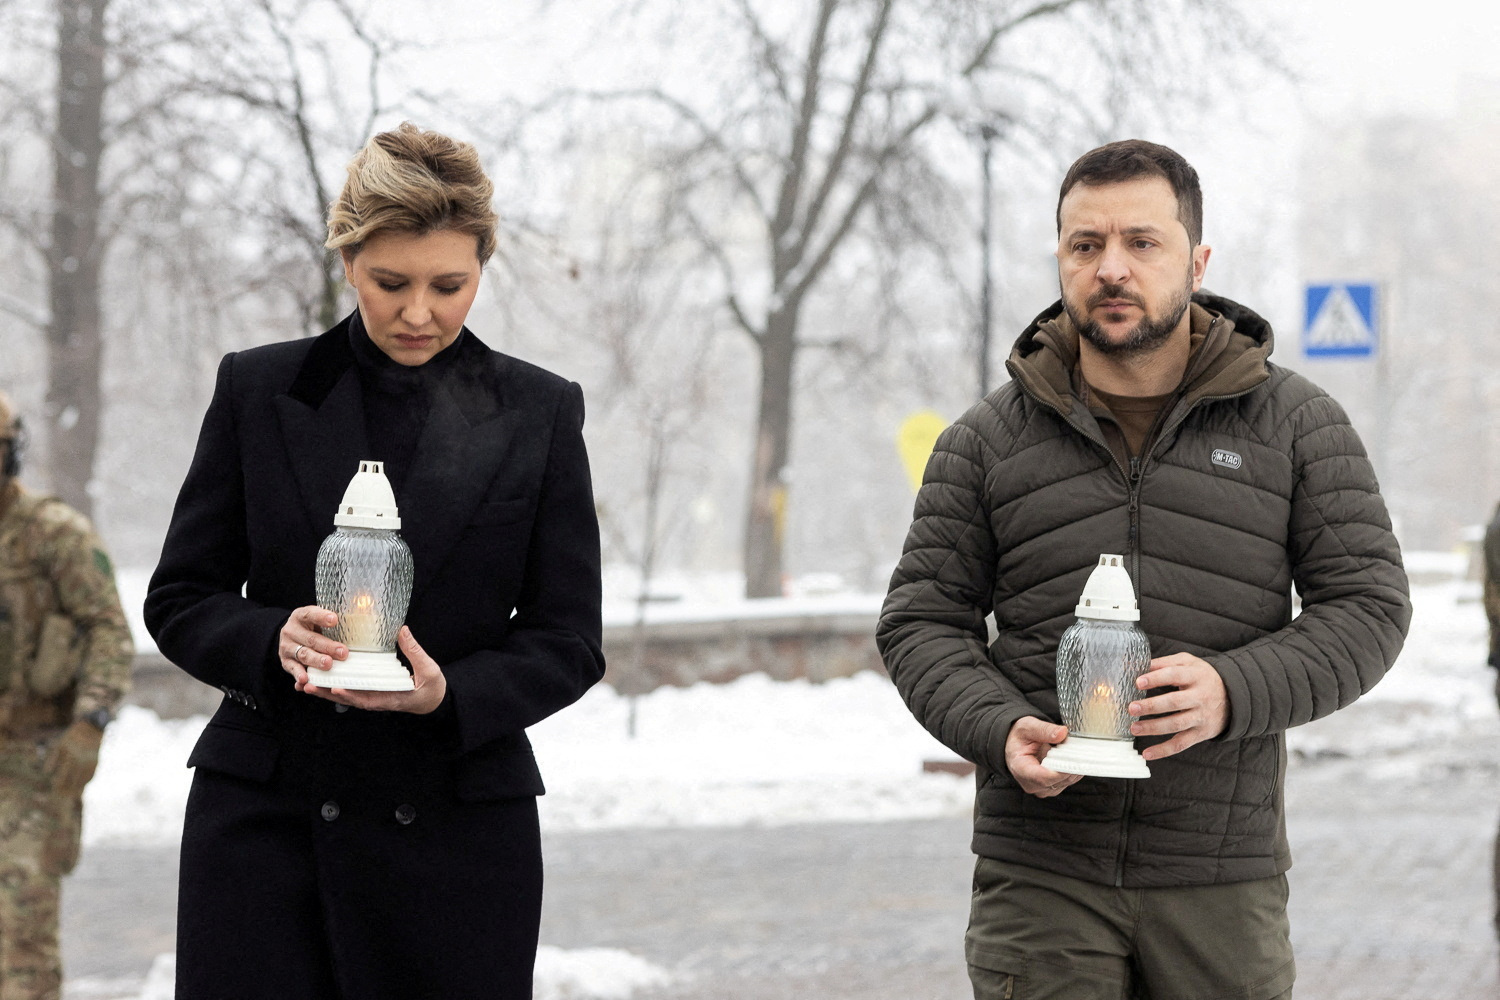 Ukraine's President Volodymyr Zelenskiy and his wife Olena attend a commemoration ceremony at a monument to the so-called 